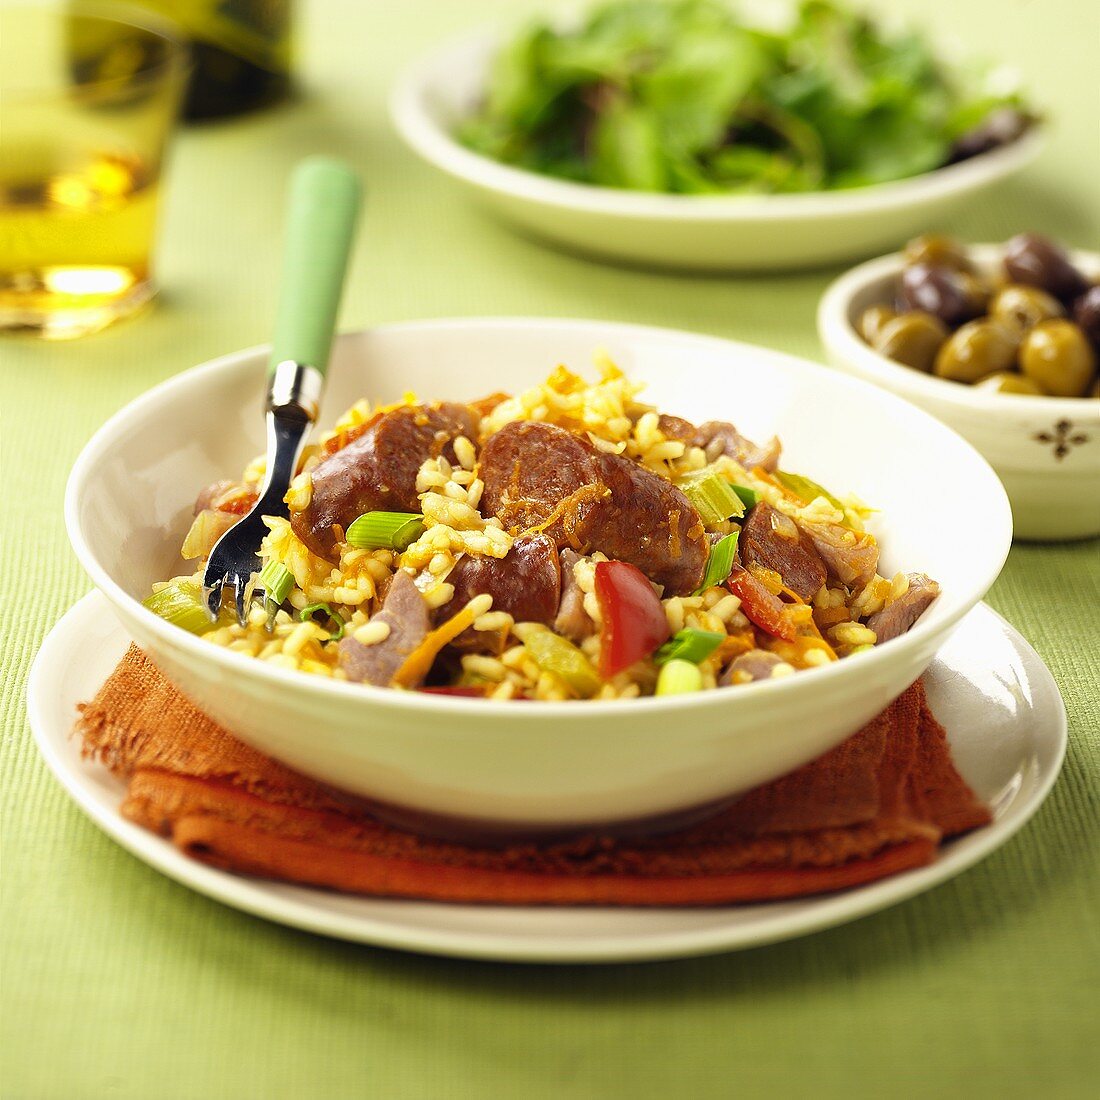 Risotto with spicy sausages and vegetables